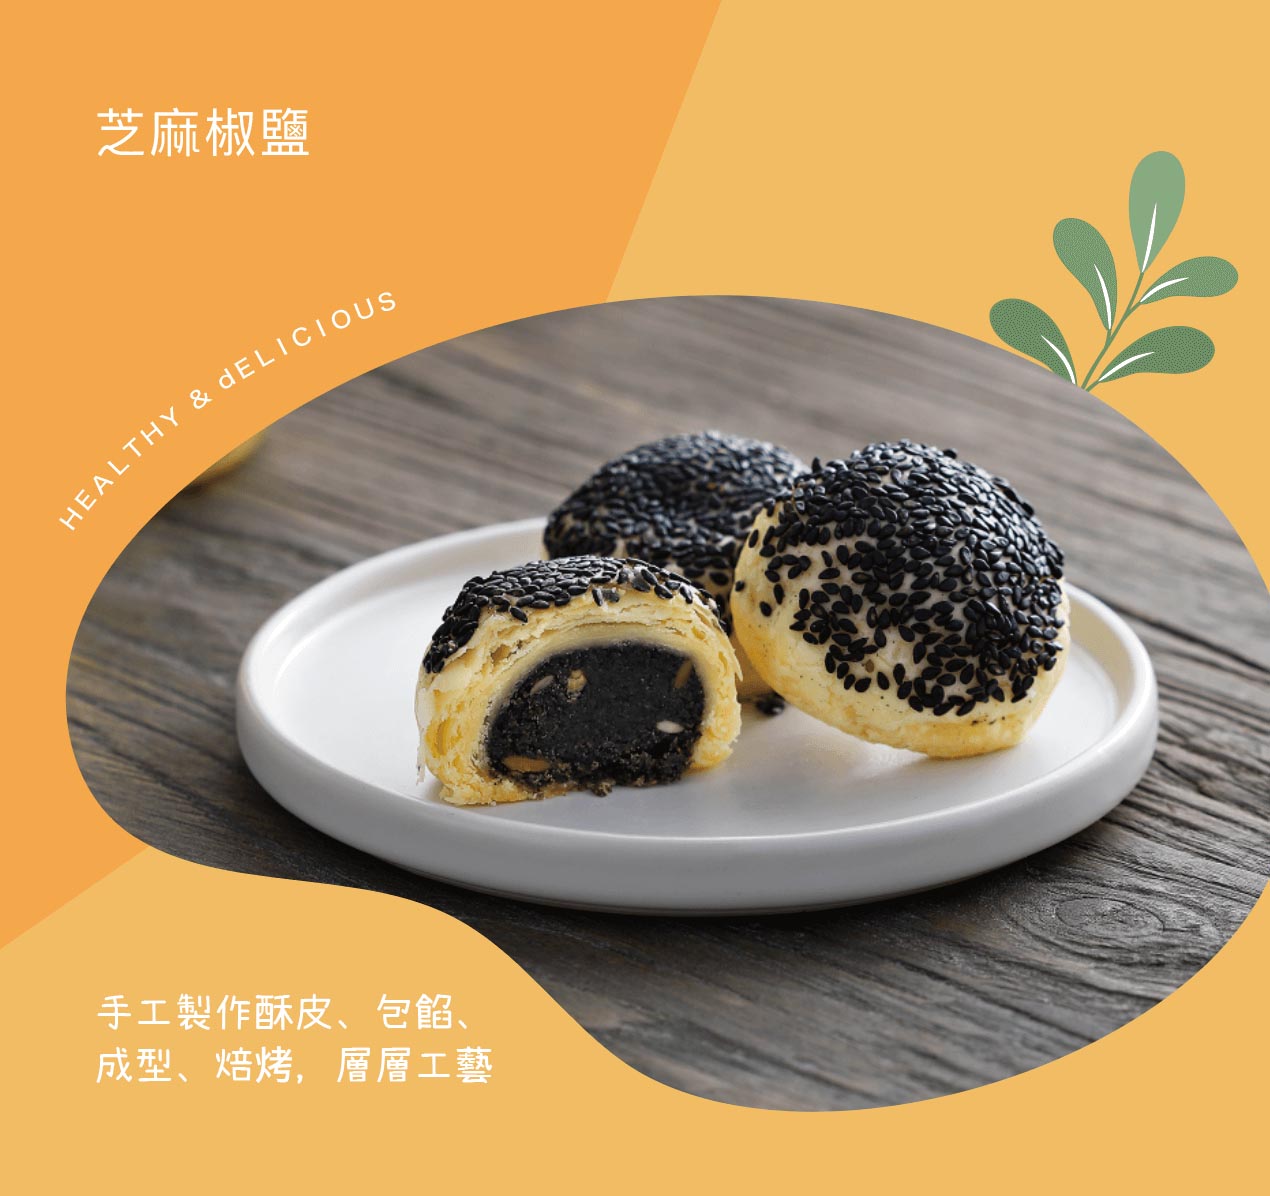 Wholesome - Sesame Pastry 【8 pcs】